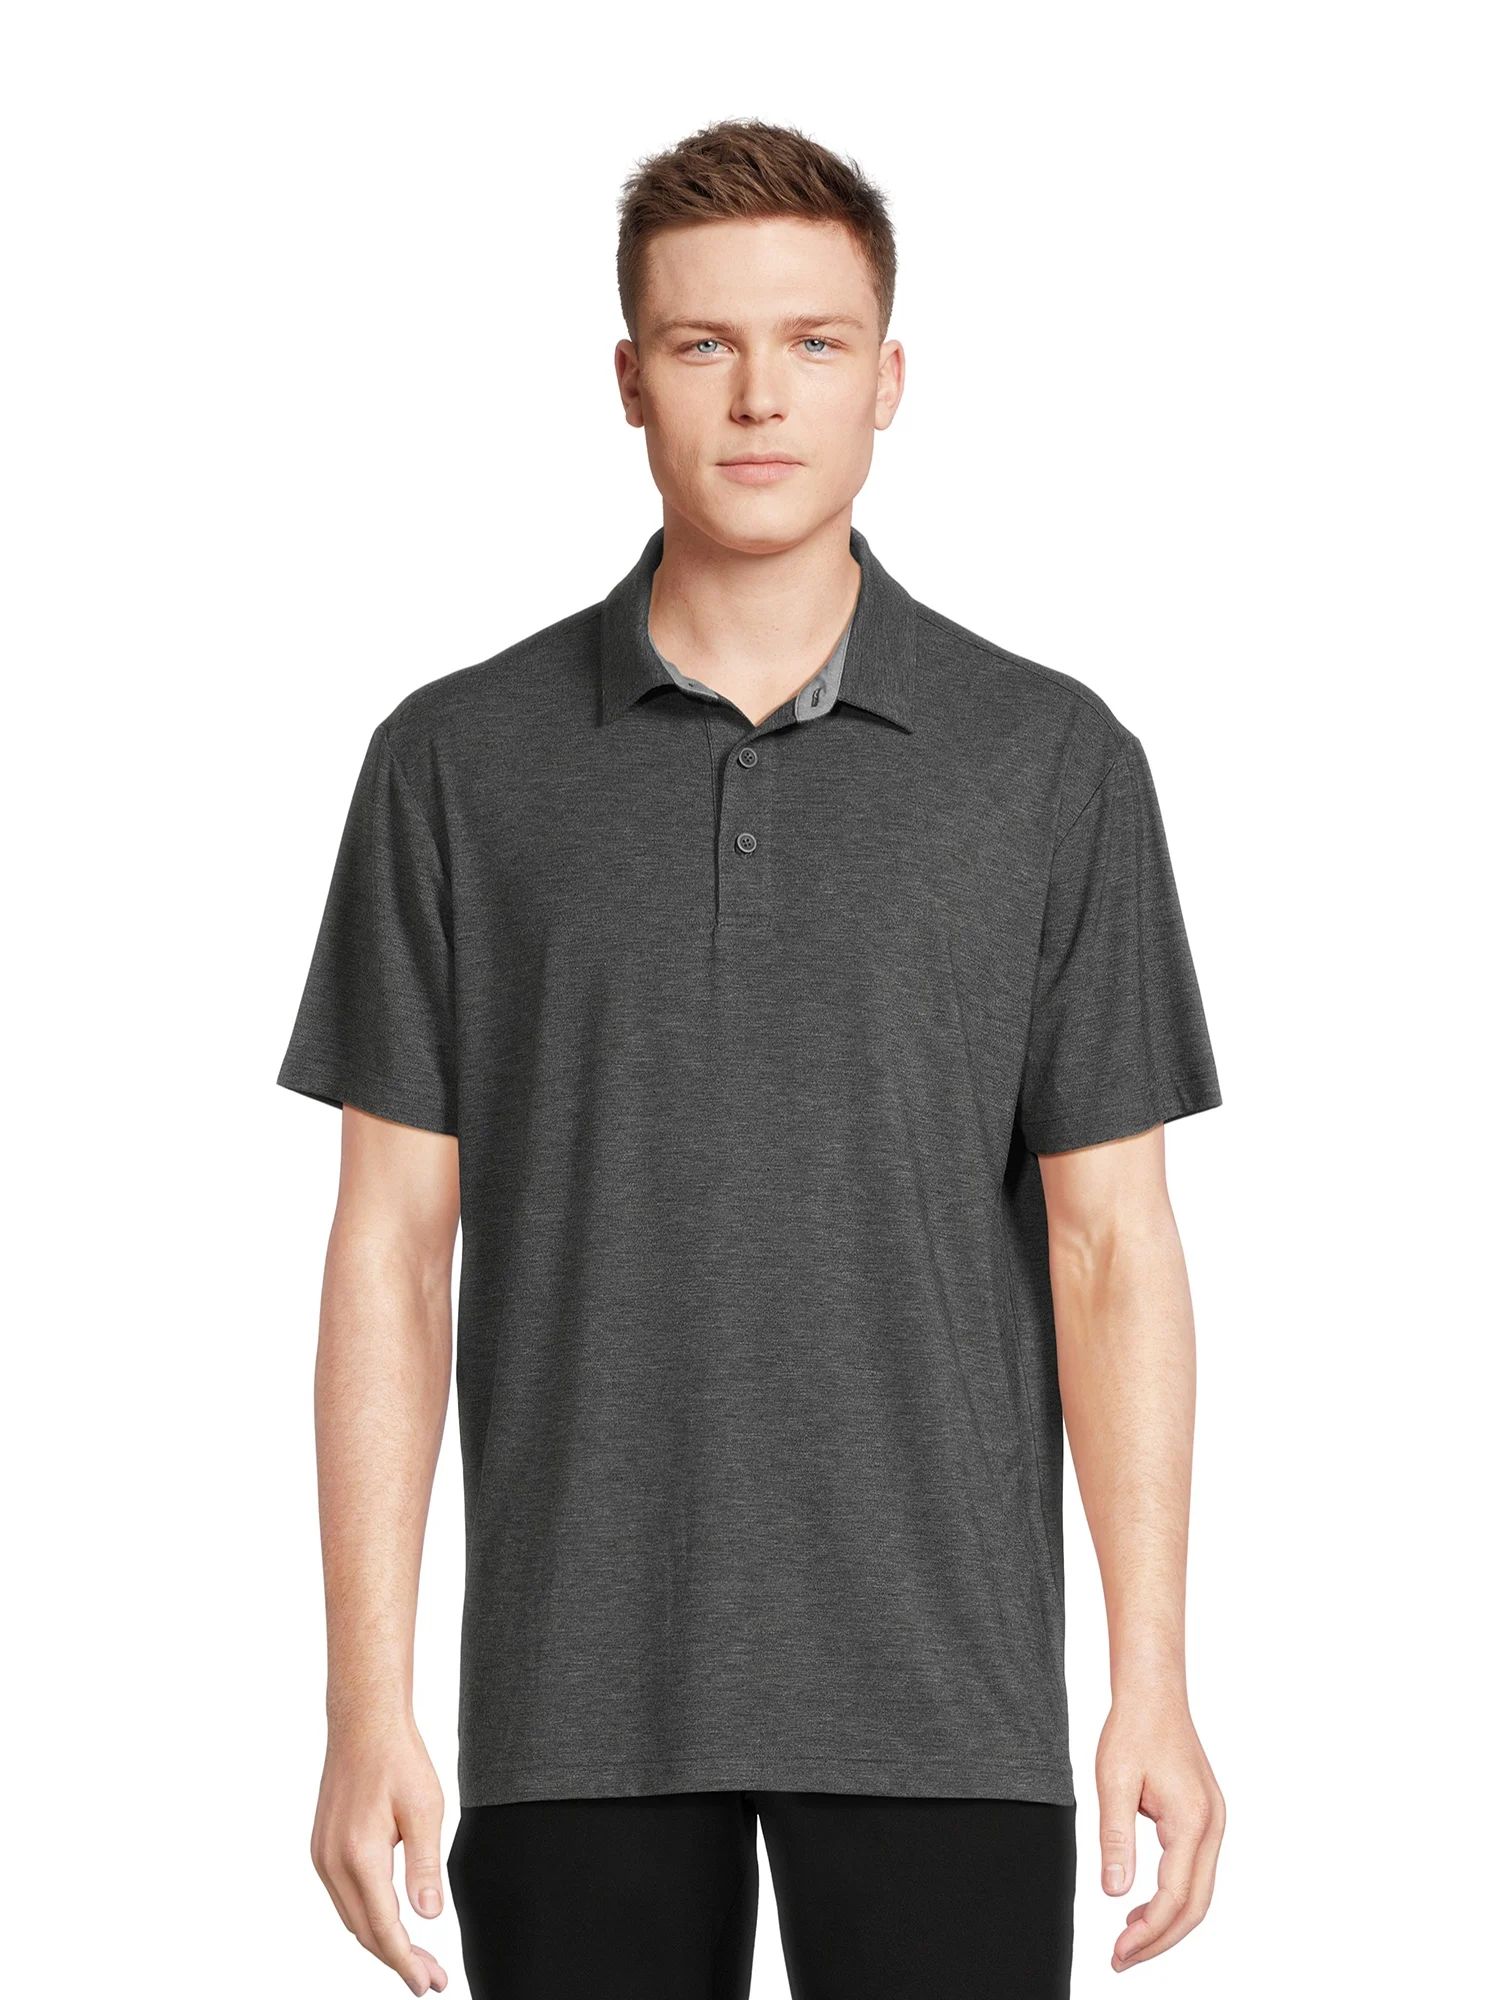 George Men’s & Big Men's Jersey Knit Polo Shirt with Short Sleeves, Sizes S-3XL | Walmart (US)